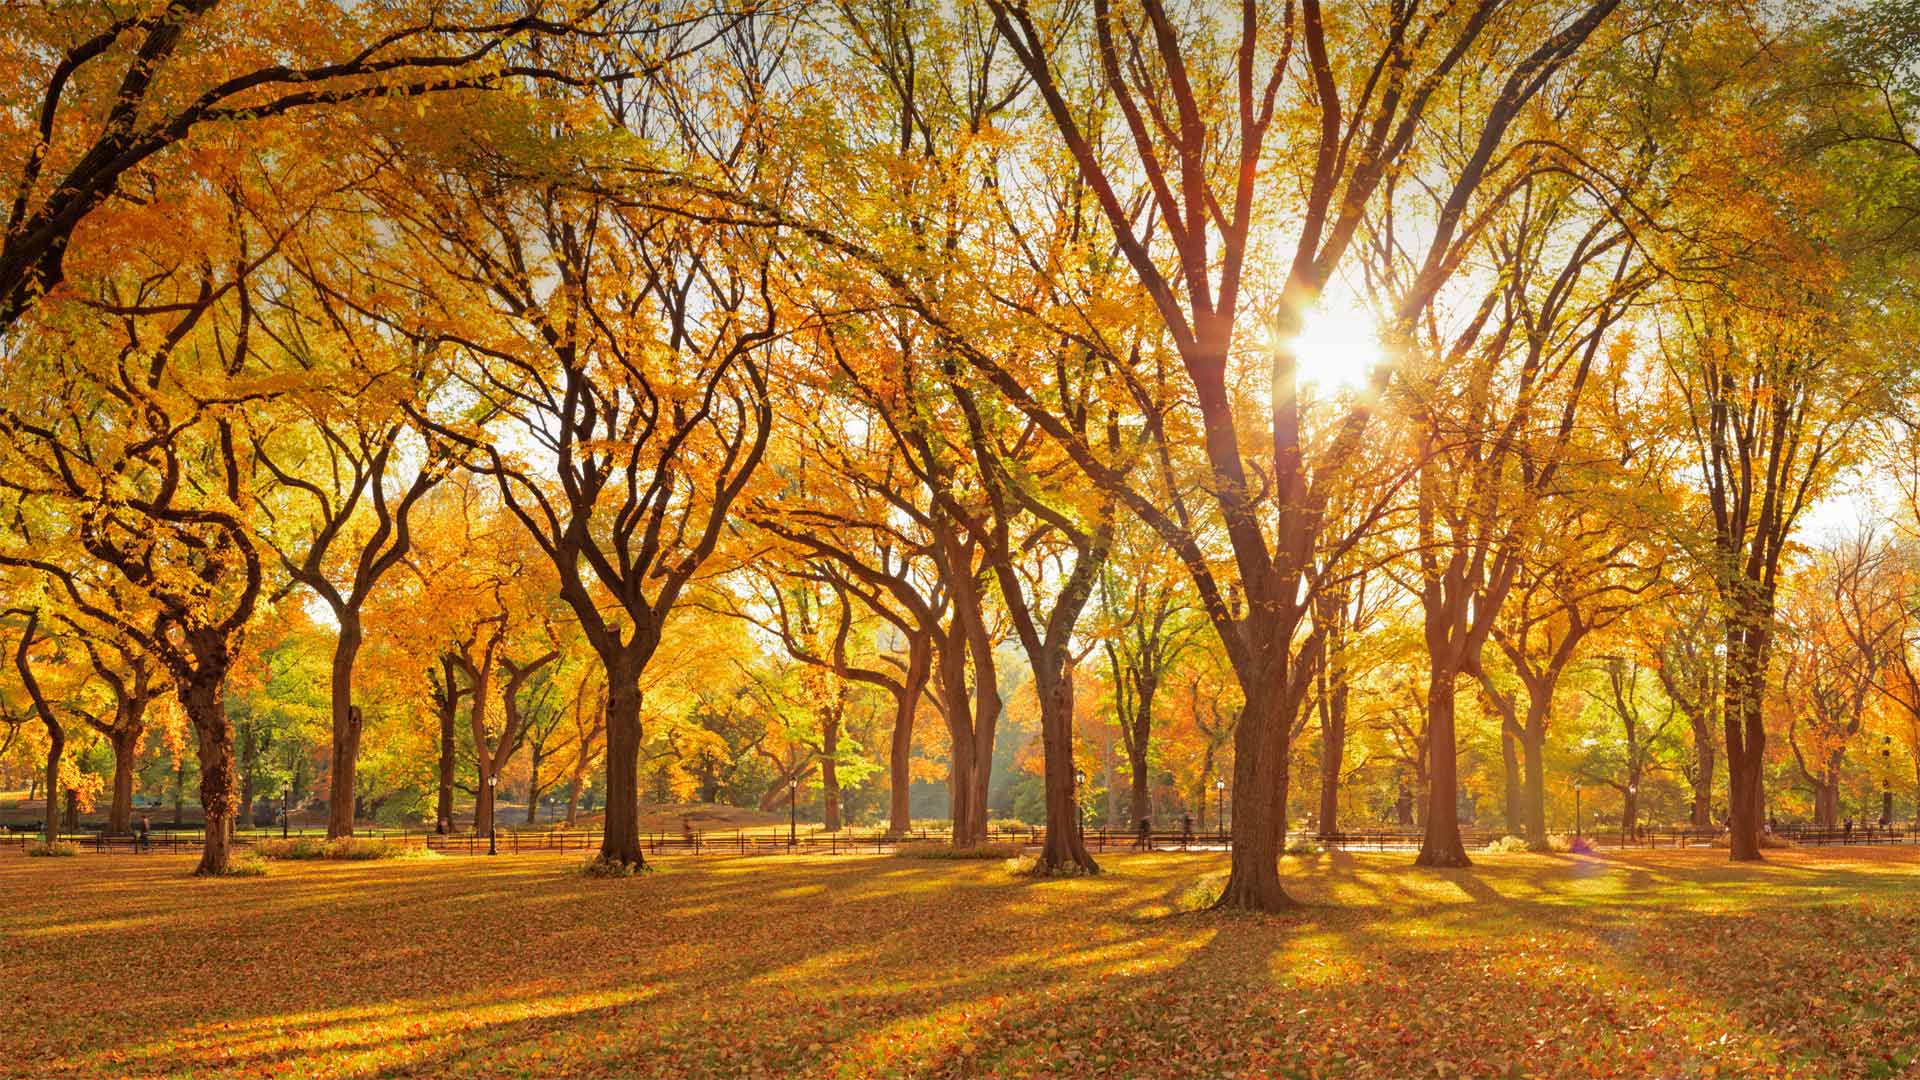 A grove of American elm trees at Central Park's Mall, New York City - AWL Images/Danita Delimont)